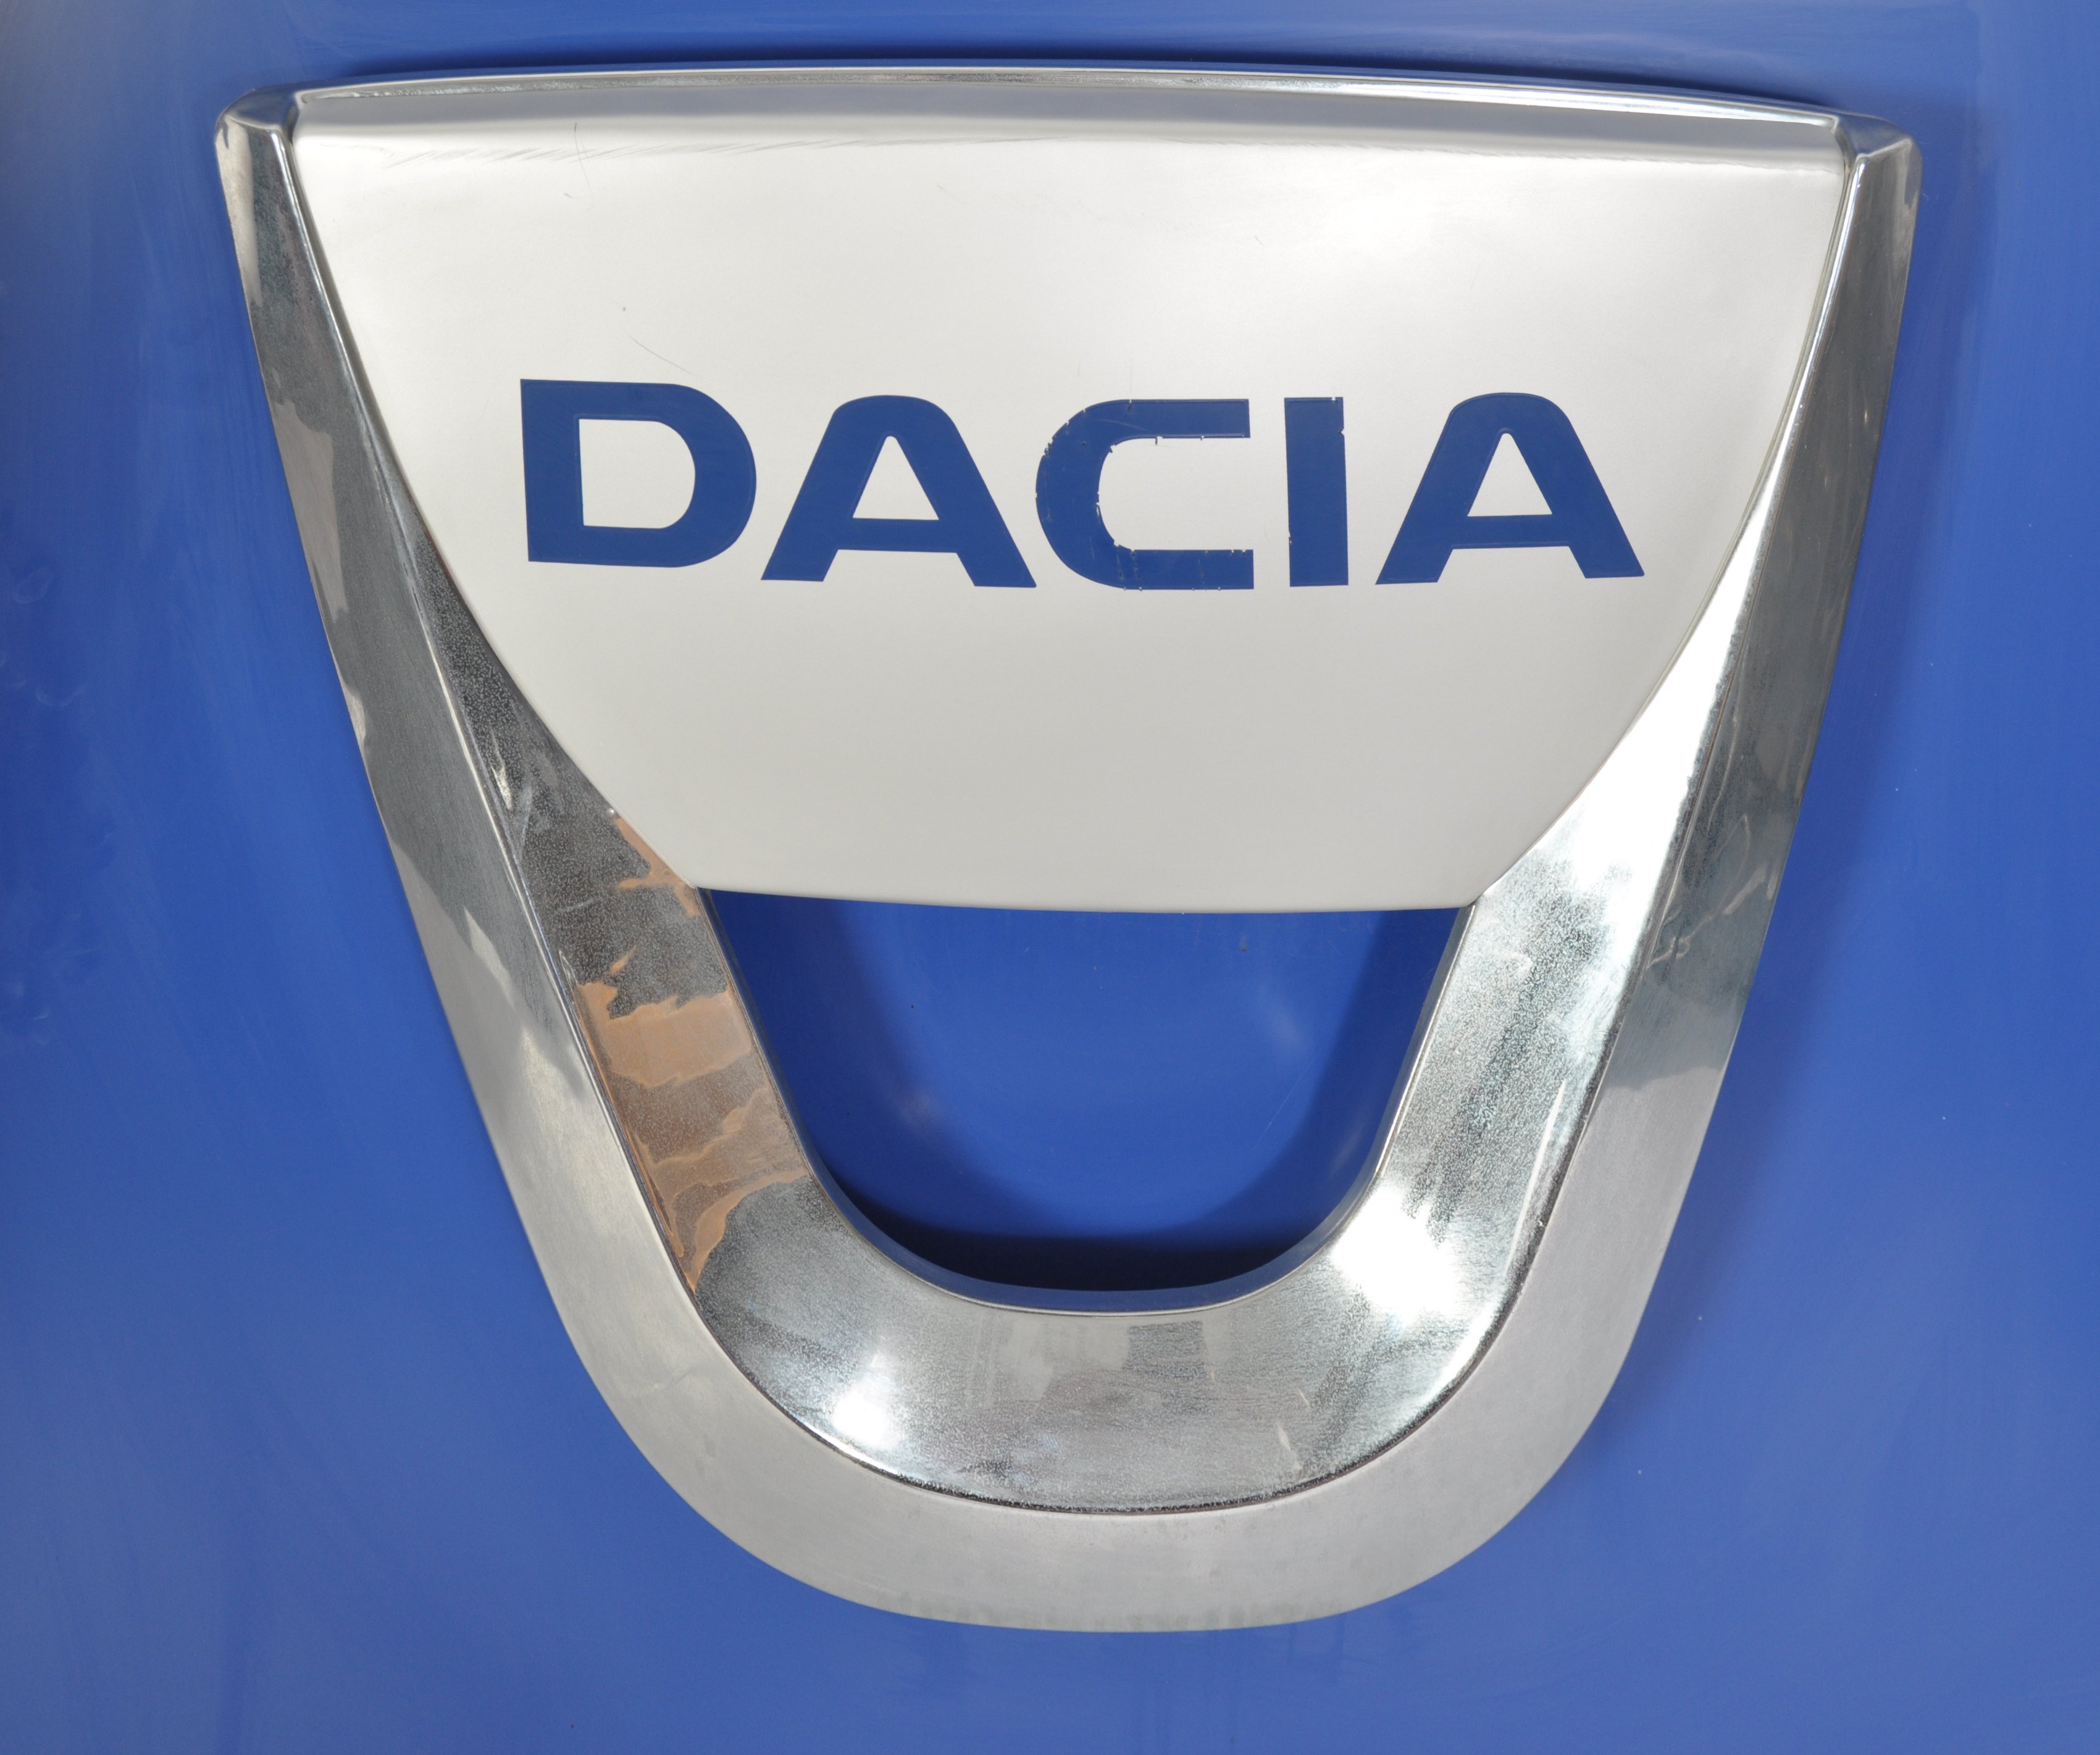 DACIA POINT OF SALE SHOWROOM LIGHT BOX SIGN FRONT - Image 2 of 3